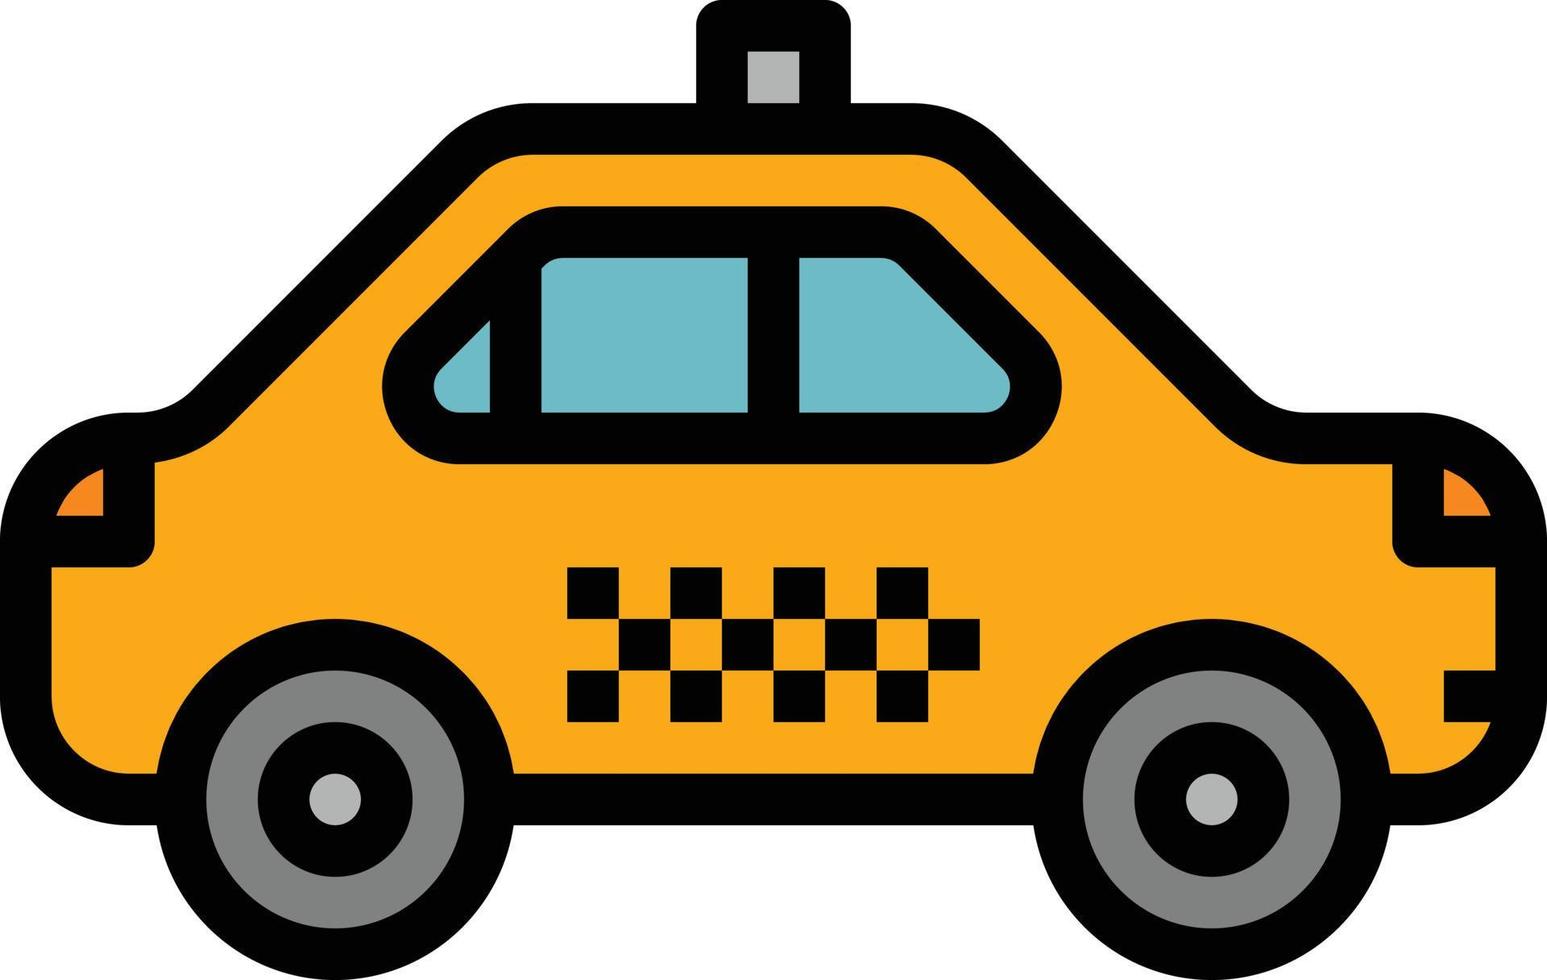 taxi transportation car - filled outline icon vector